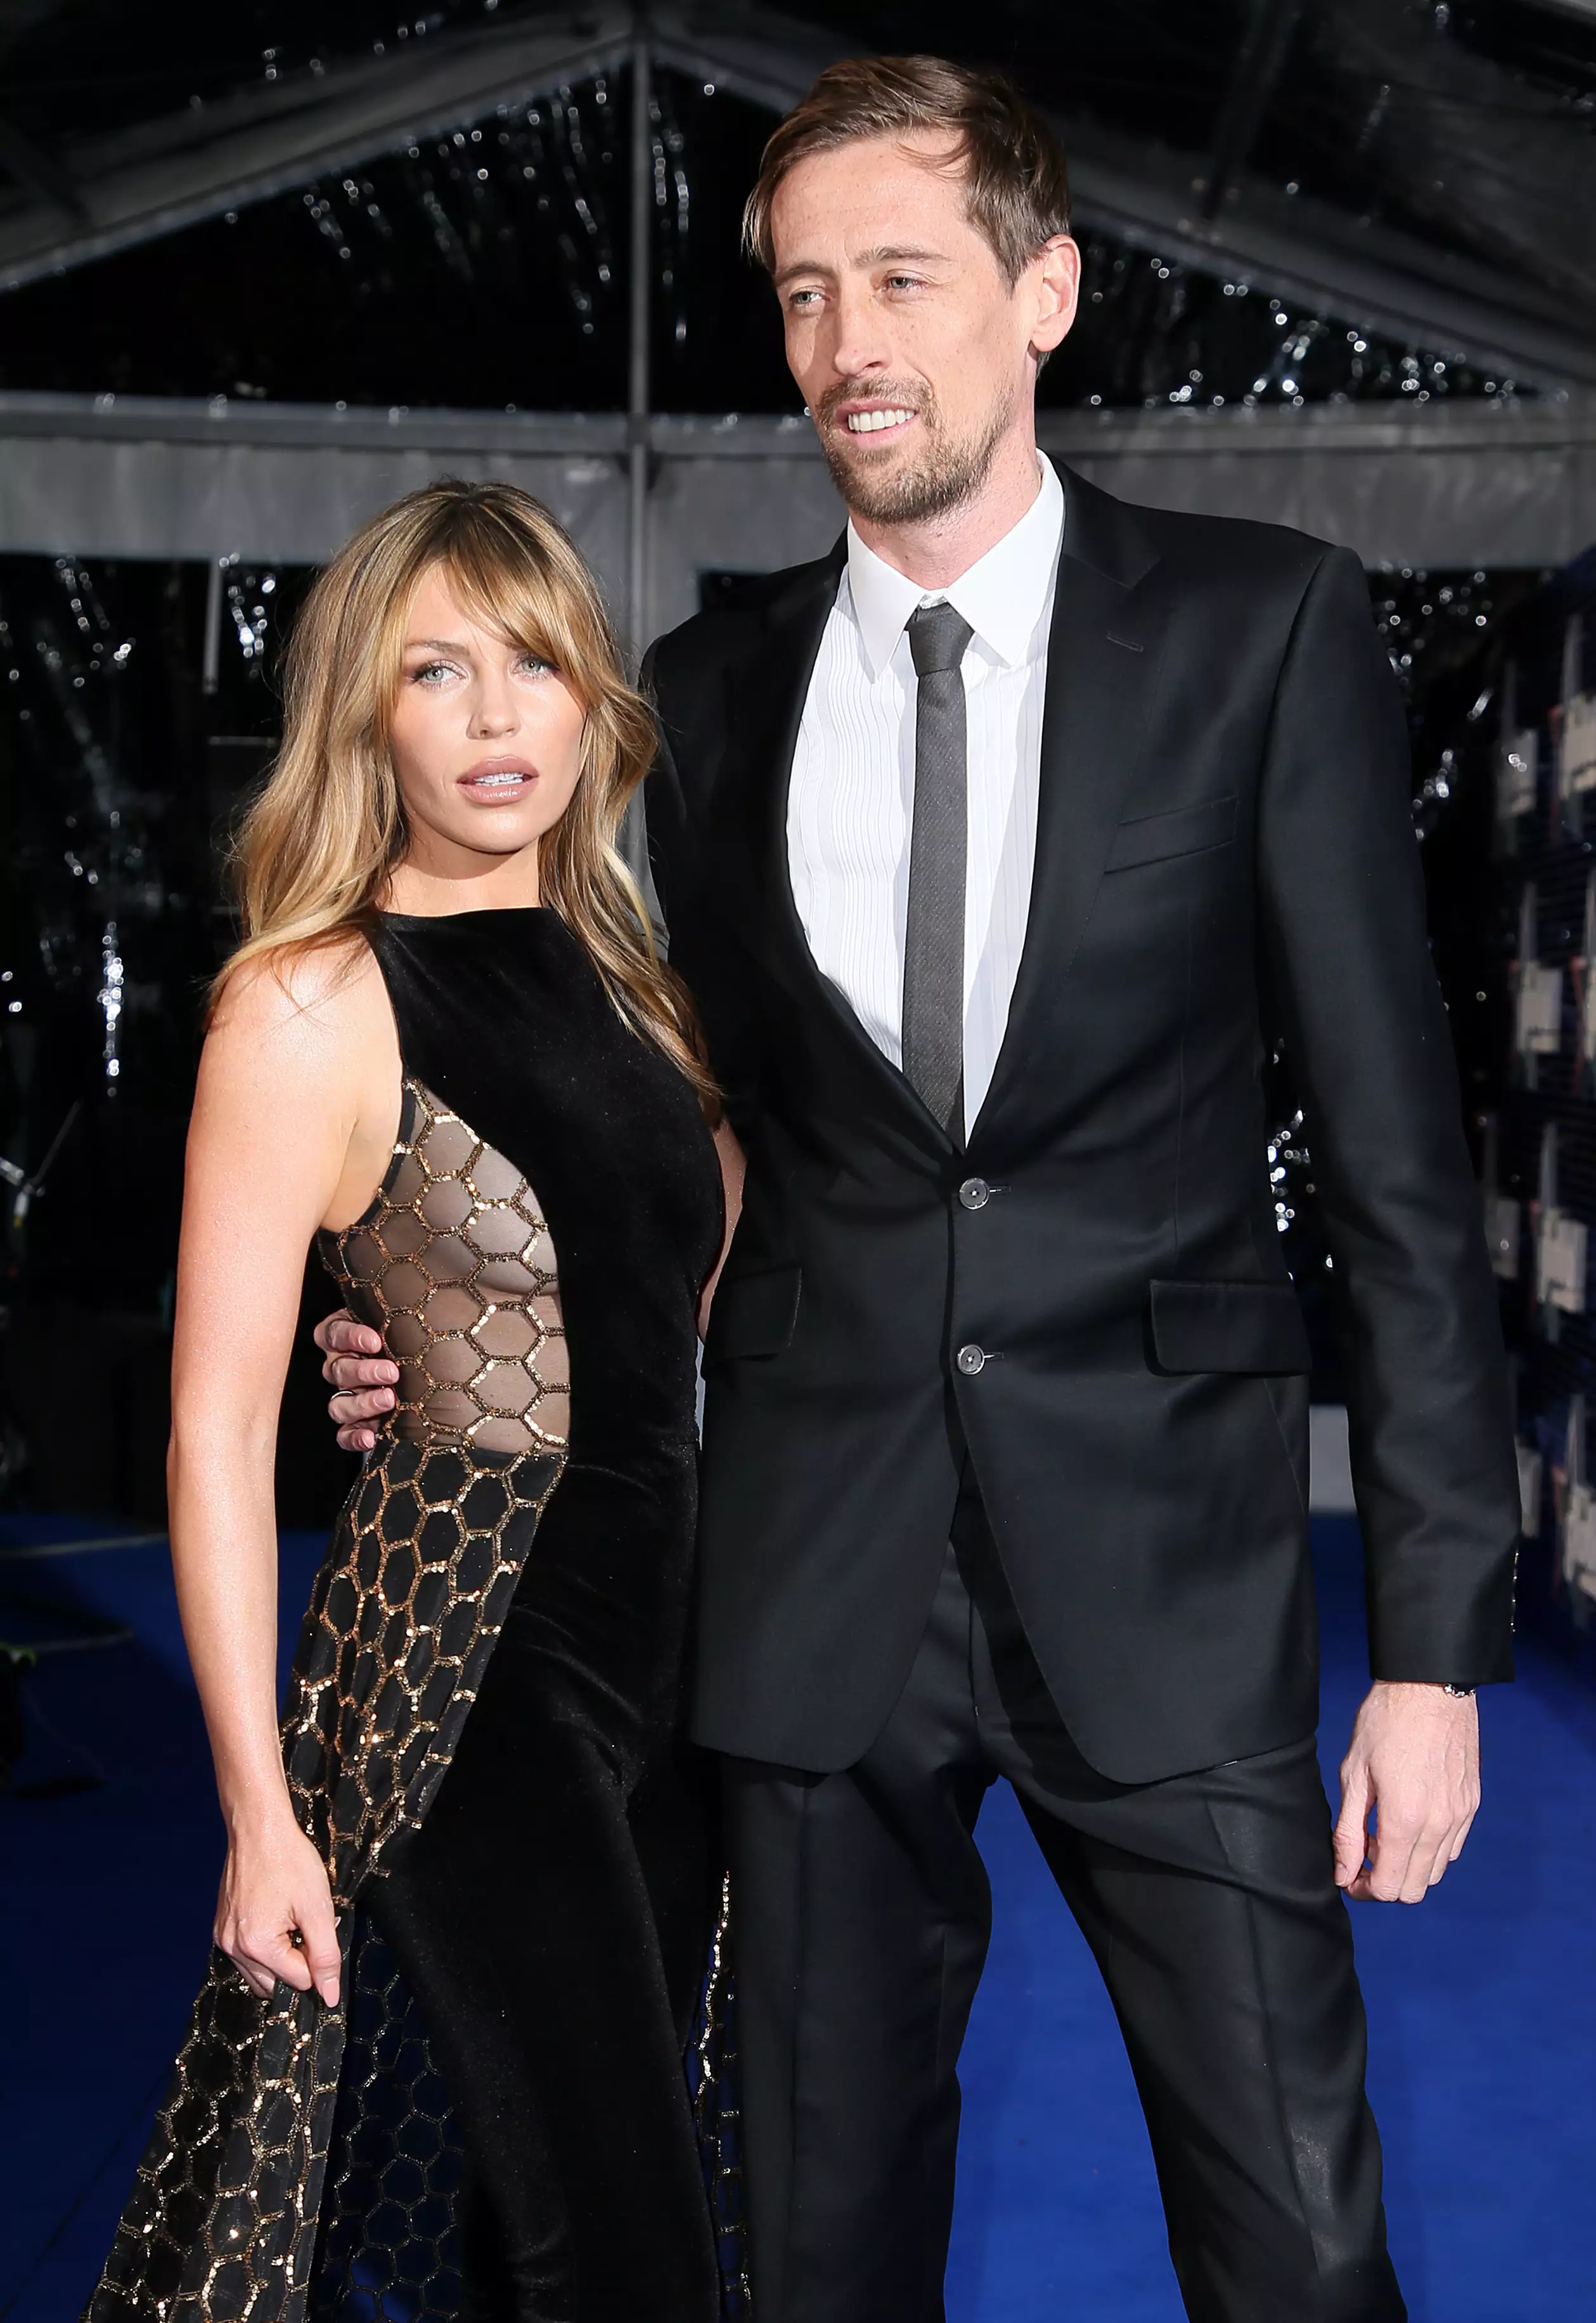 Crouch with his wife, Abbey Clancy.